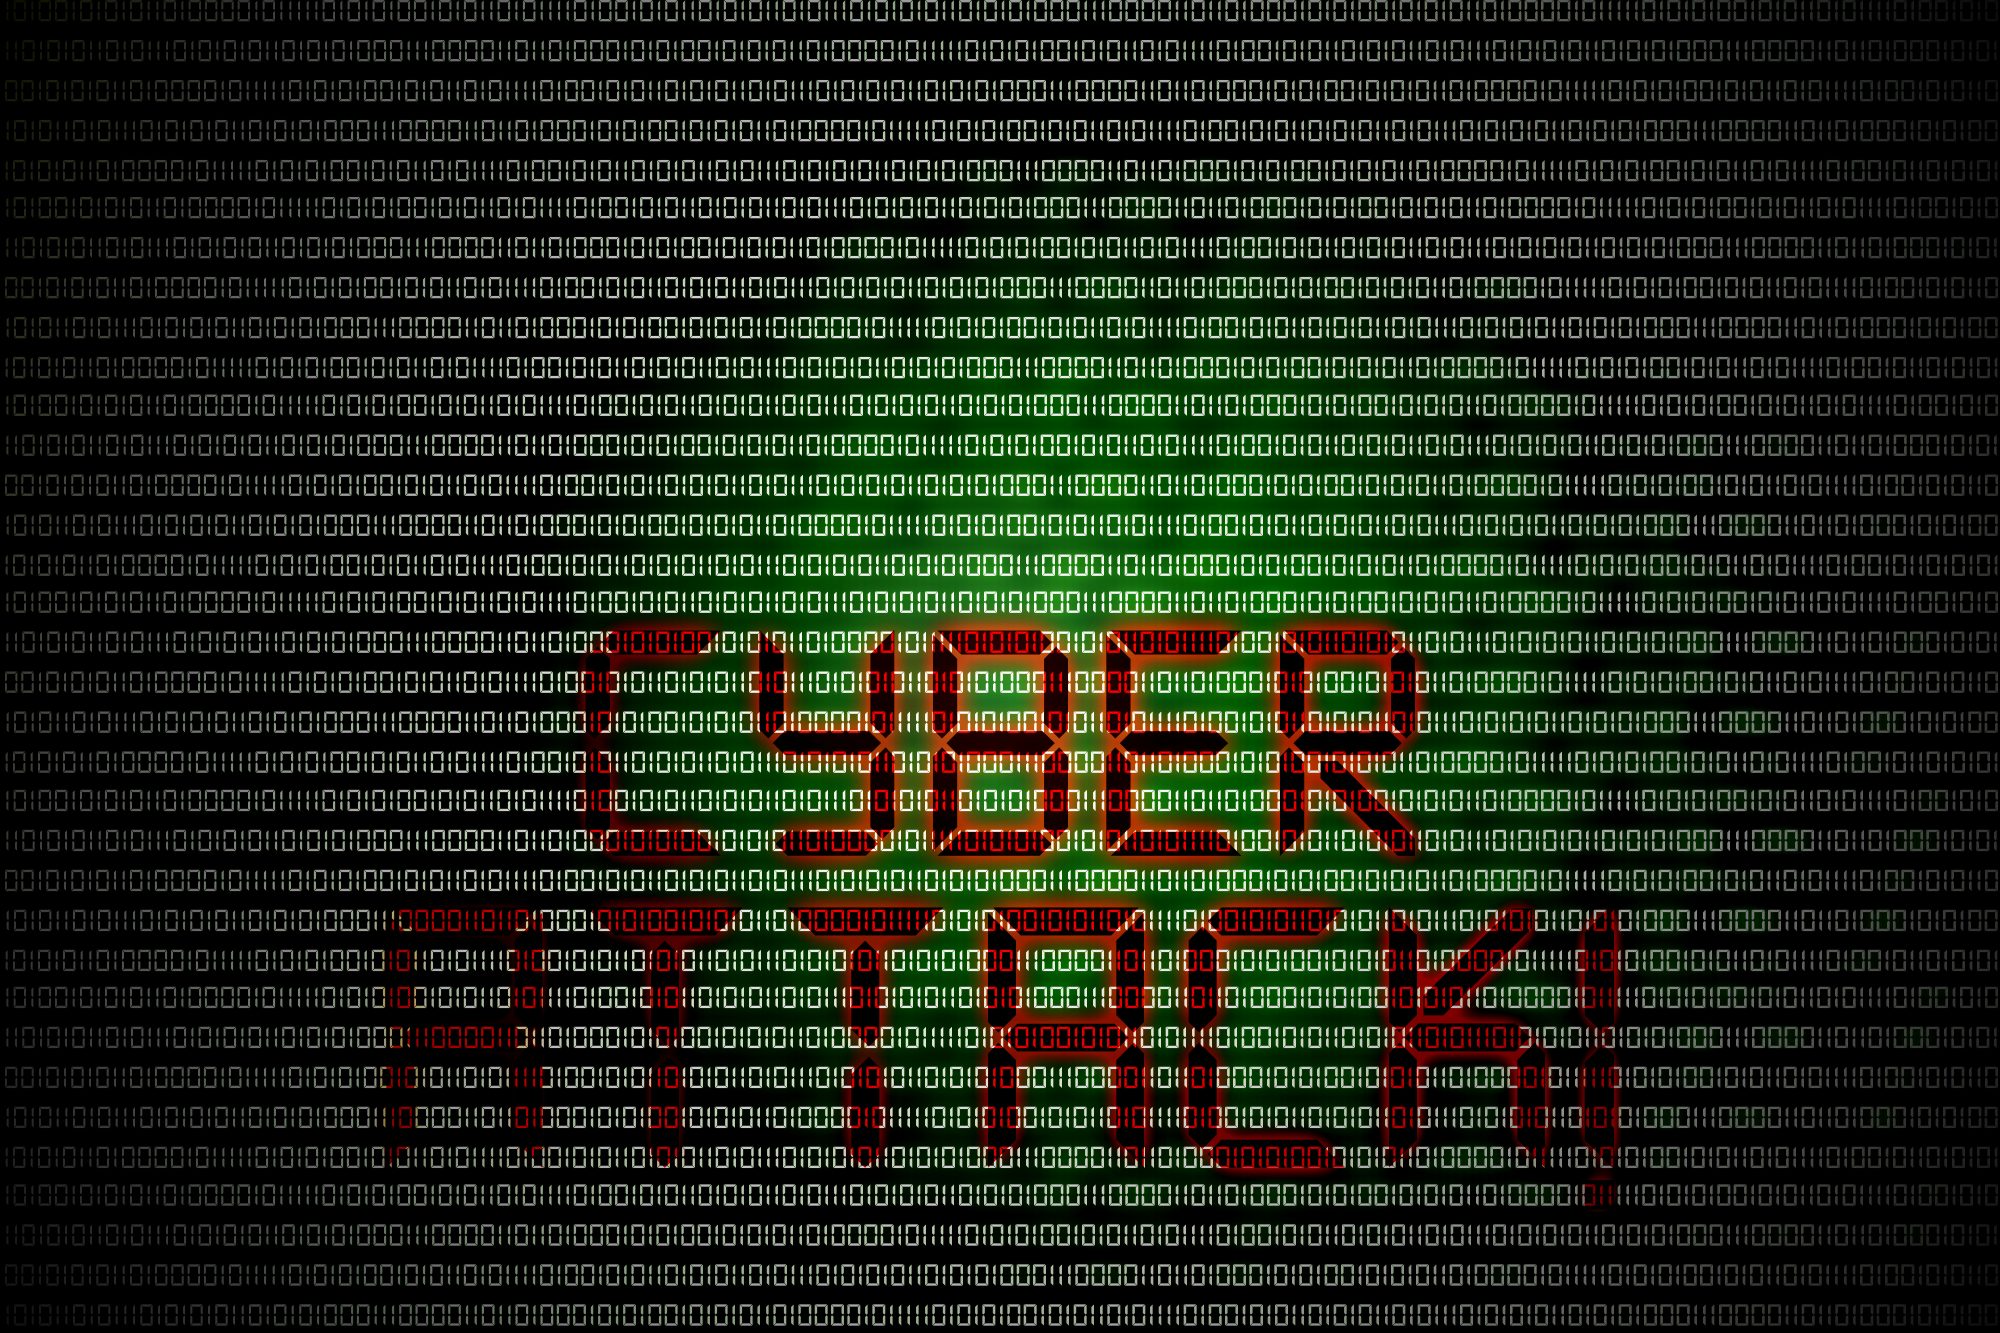 Cyber attack written on a computer screen with 1s and 0s.